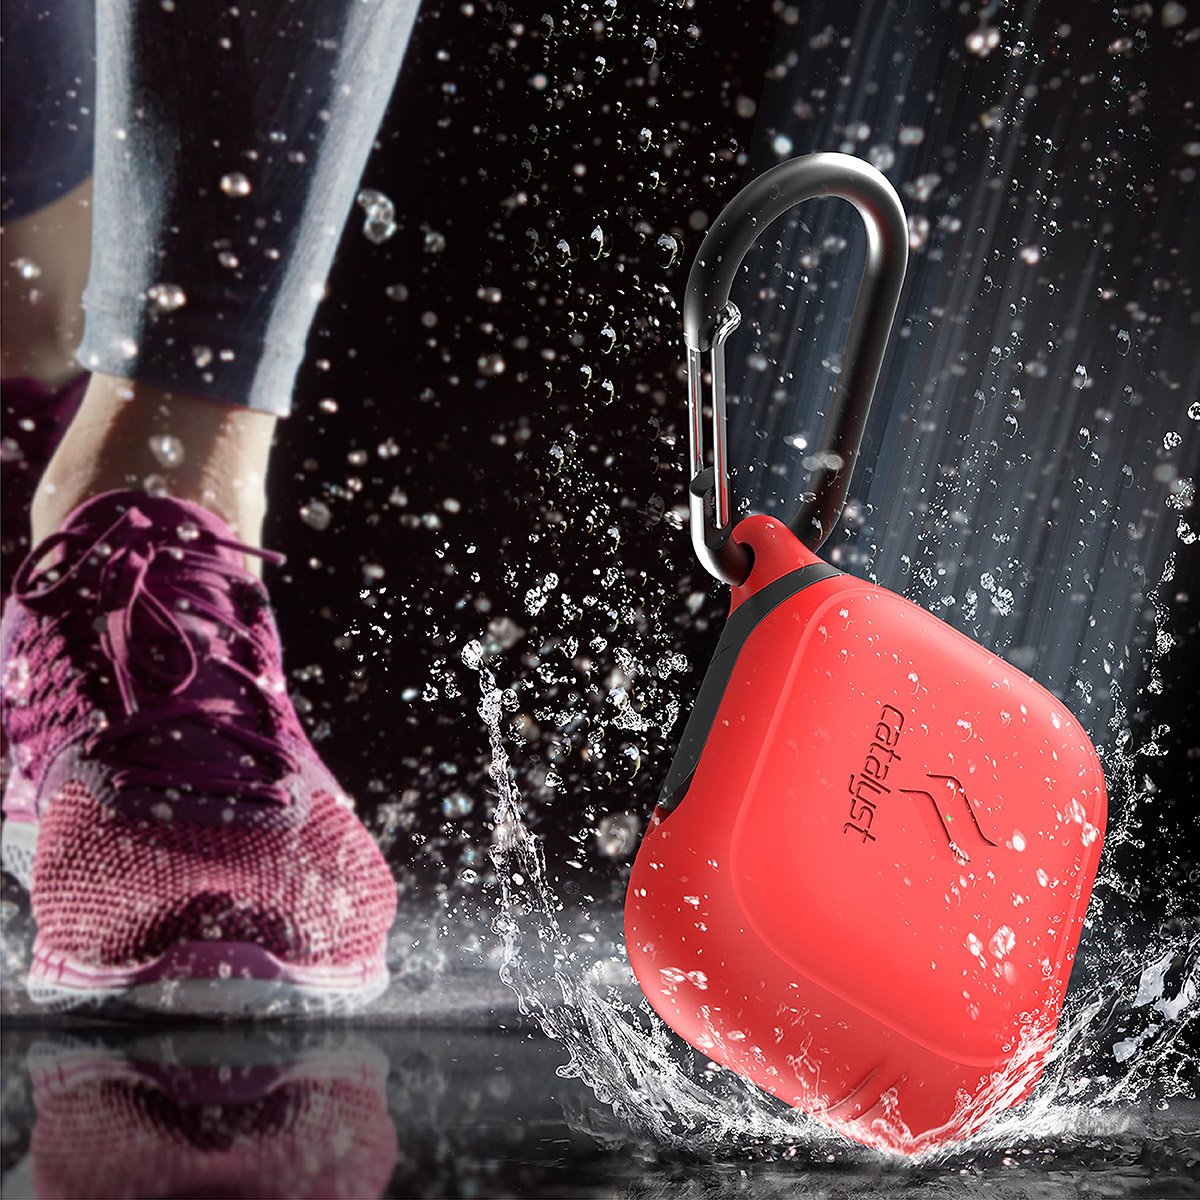 CATAPDPRORED | catalyst airpods pro gen 2 1 waterproof case carabiner flame red dropped and splashes of water running shoes